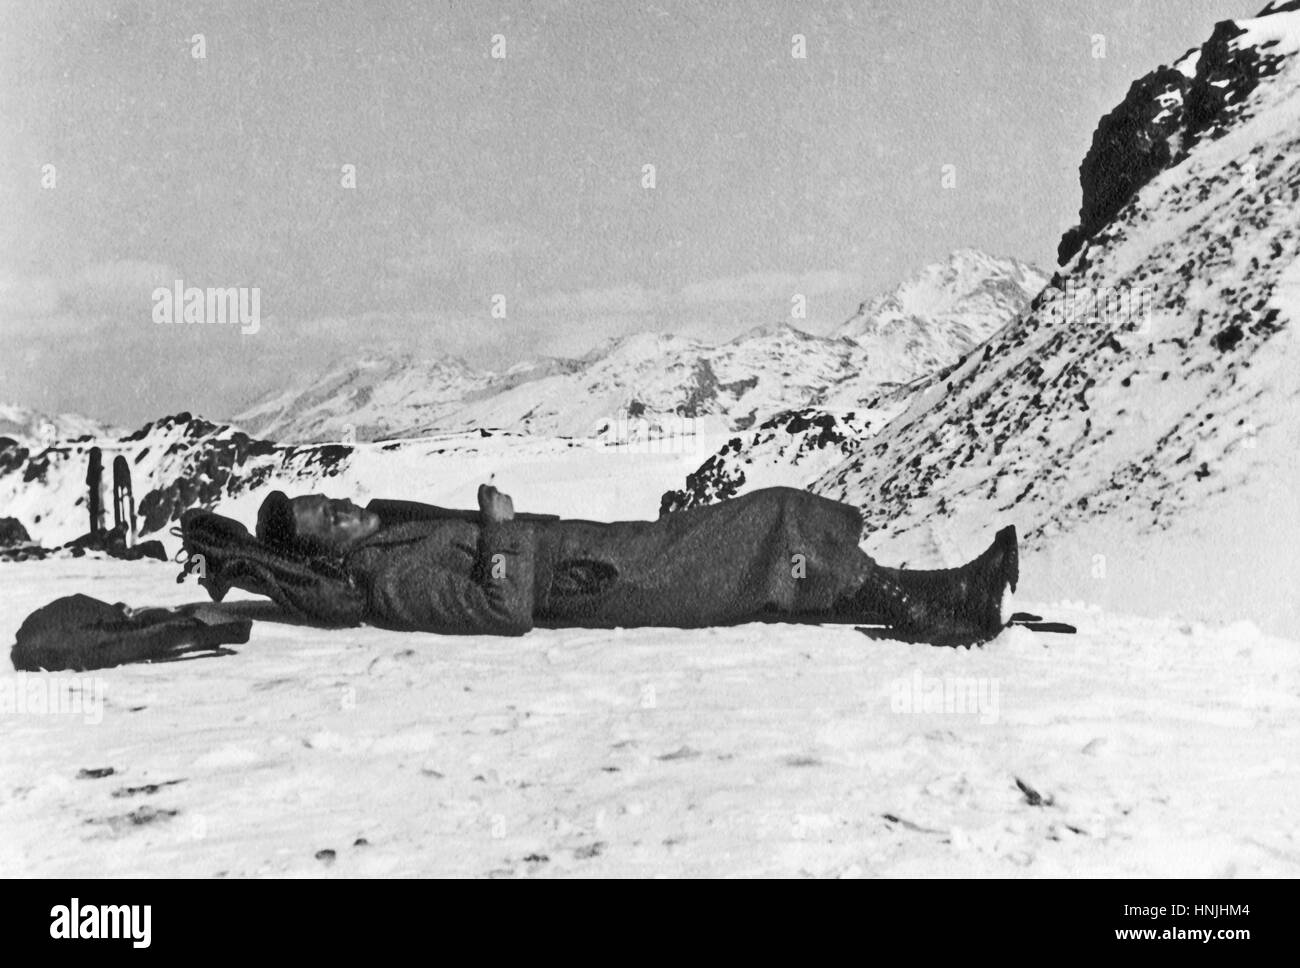 Pass Sorel, Italy 1939. Young tanned excursionist rests with a cigarette in hand laying down on the snow of a glacier of Italian Alps. Scan from analog photography, private family collection before WWII. Stock Photo